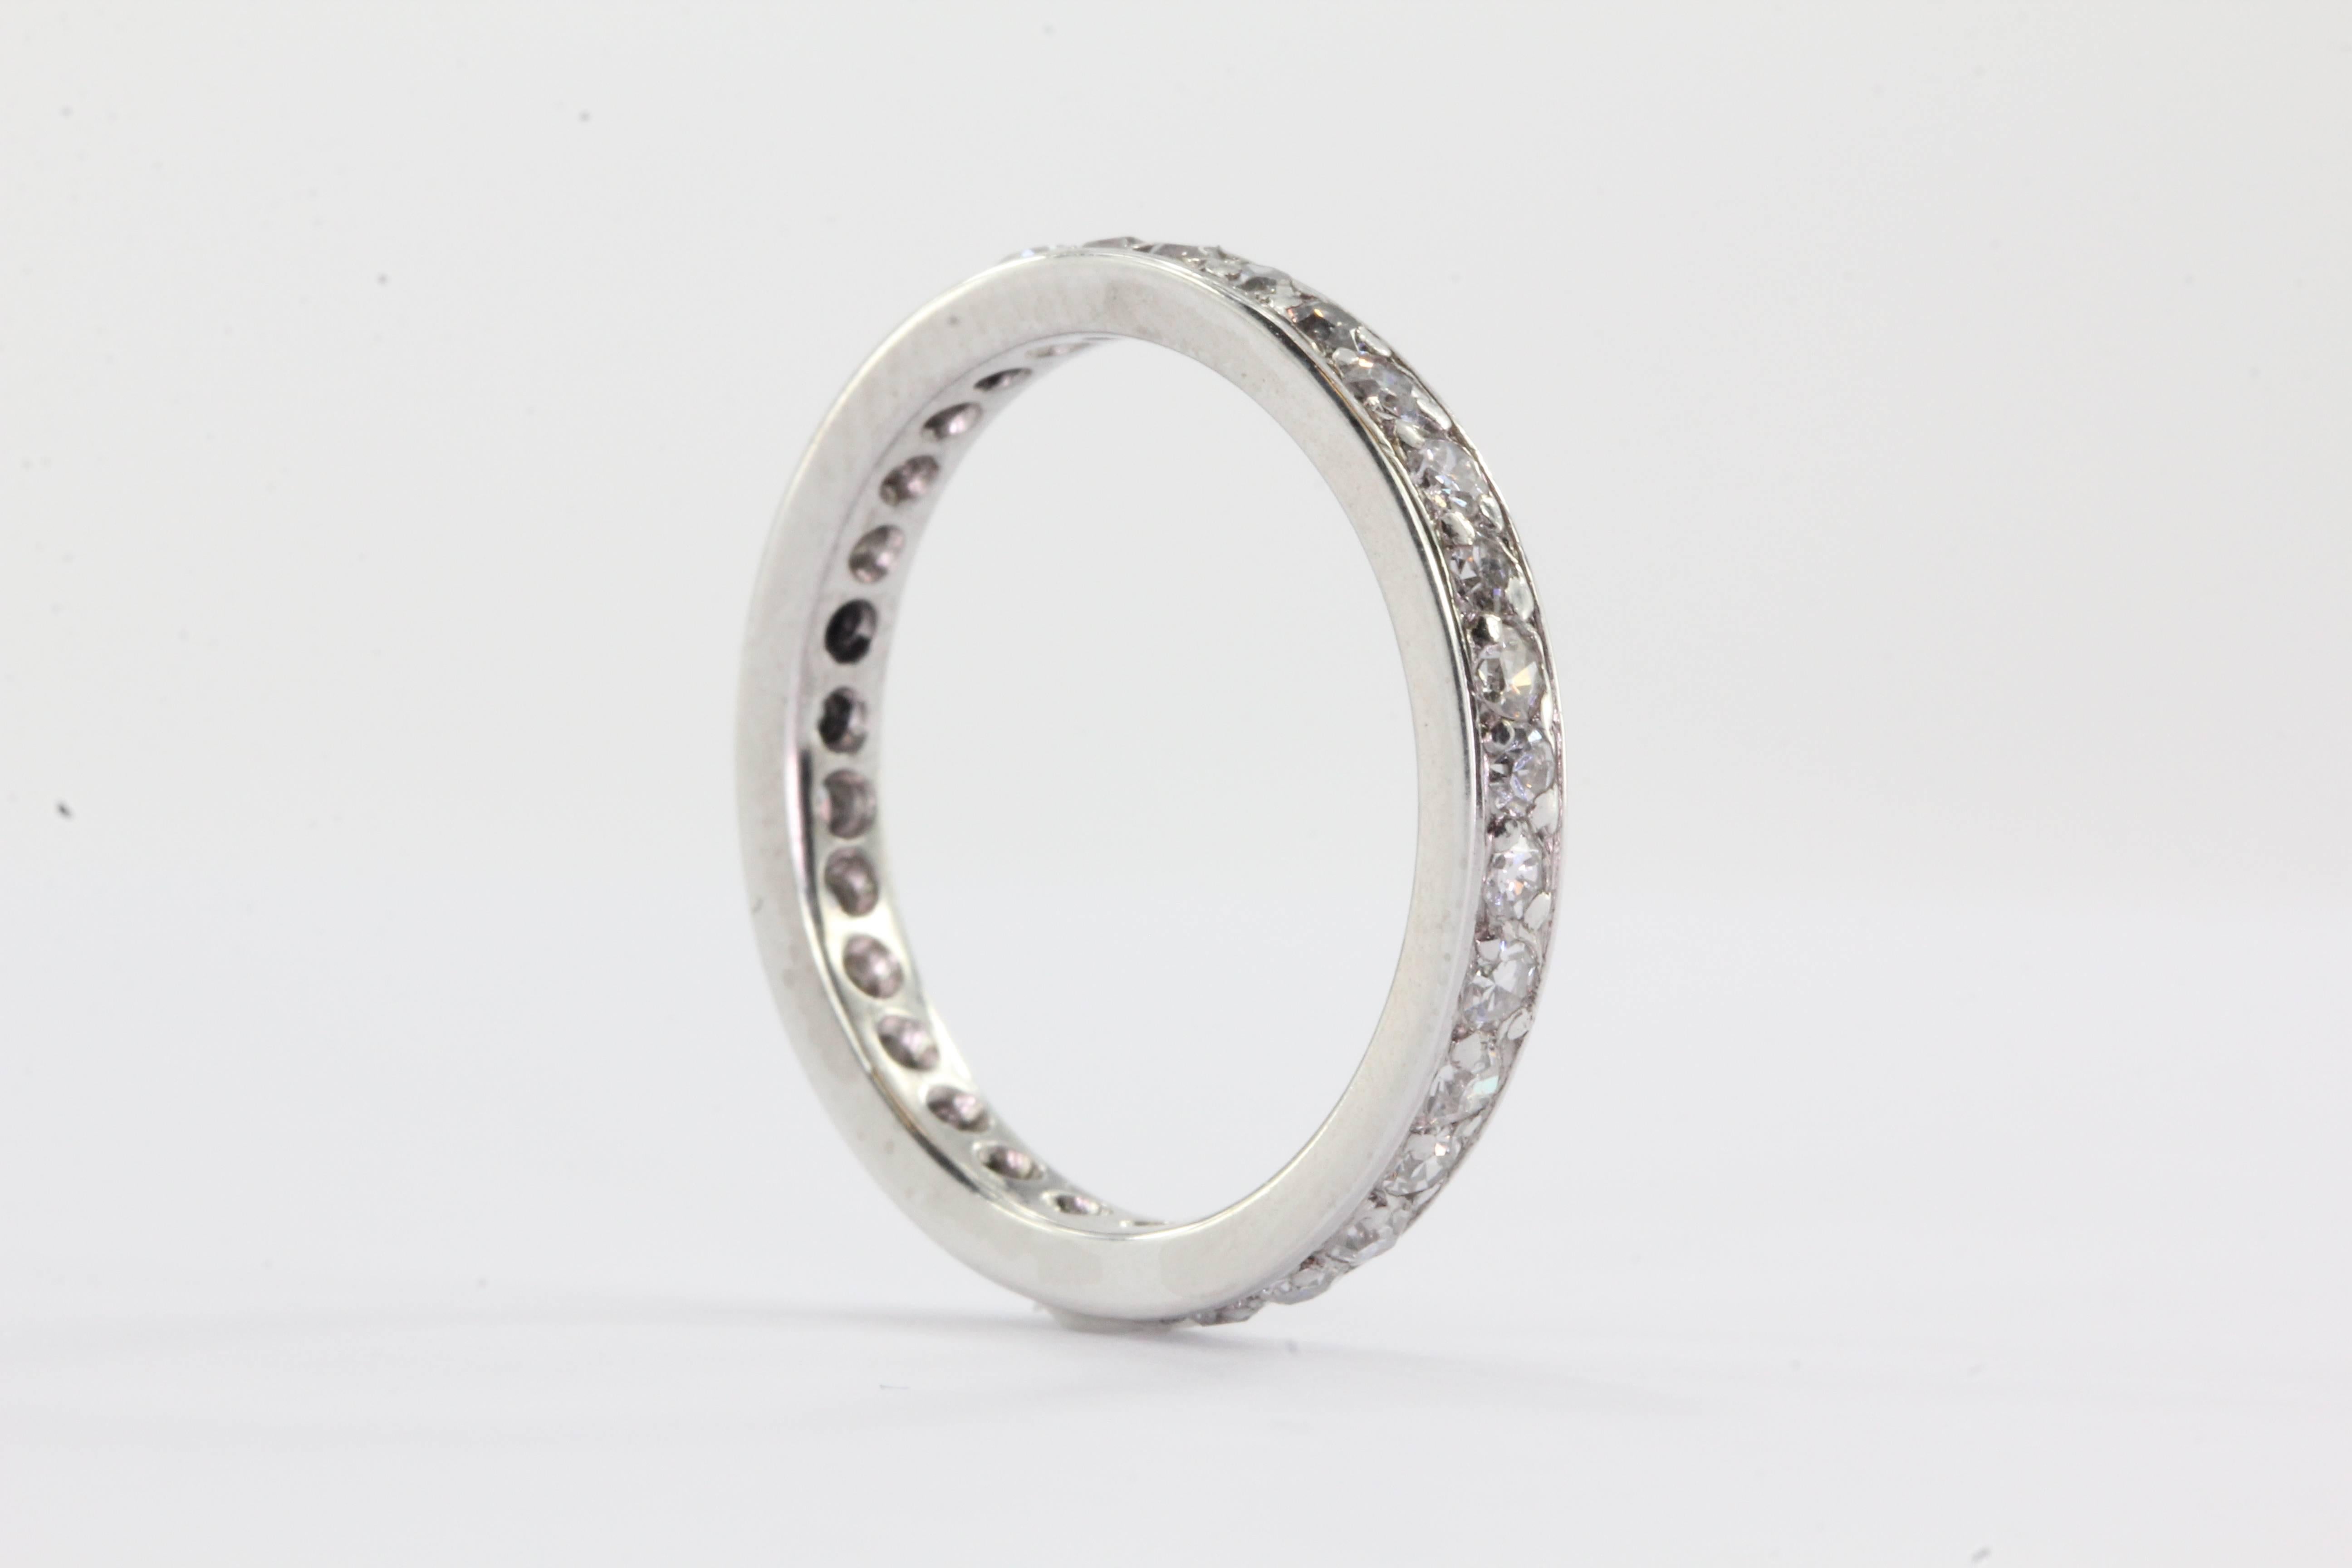 Antique Platinum 1 Carat Total Weight Diamond Eternity Band Ring Size 6. The ring is in excellent estate condition and ready to wear. The ring is set with approximately 1 carat of G/H color Vs1 clarity single cut diamonds. The ring is a size 6 and